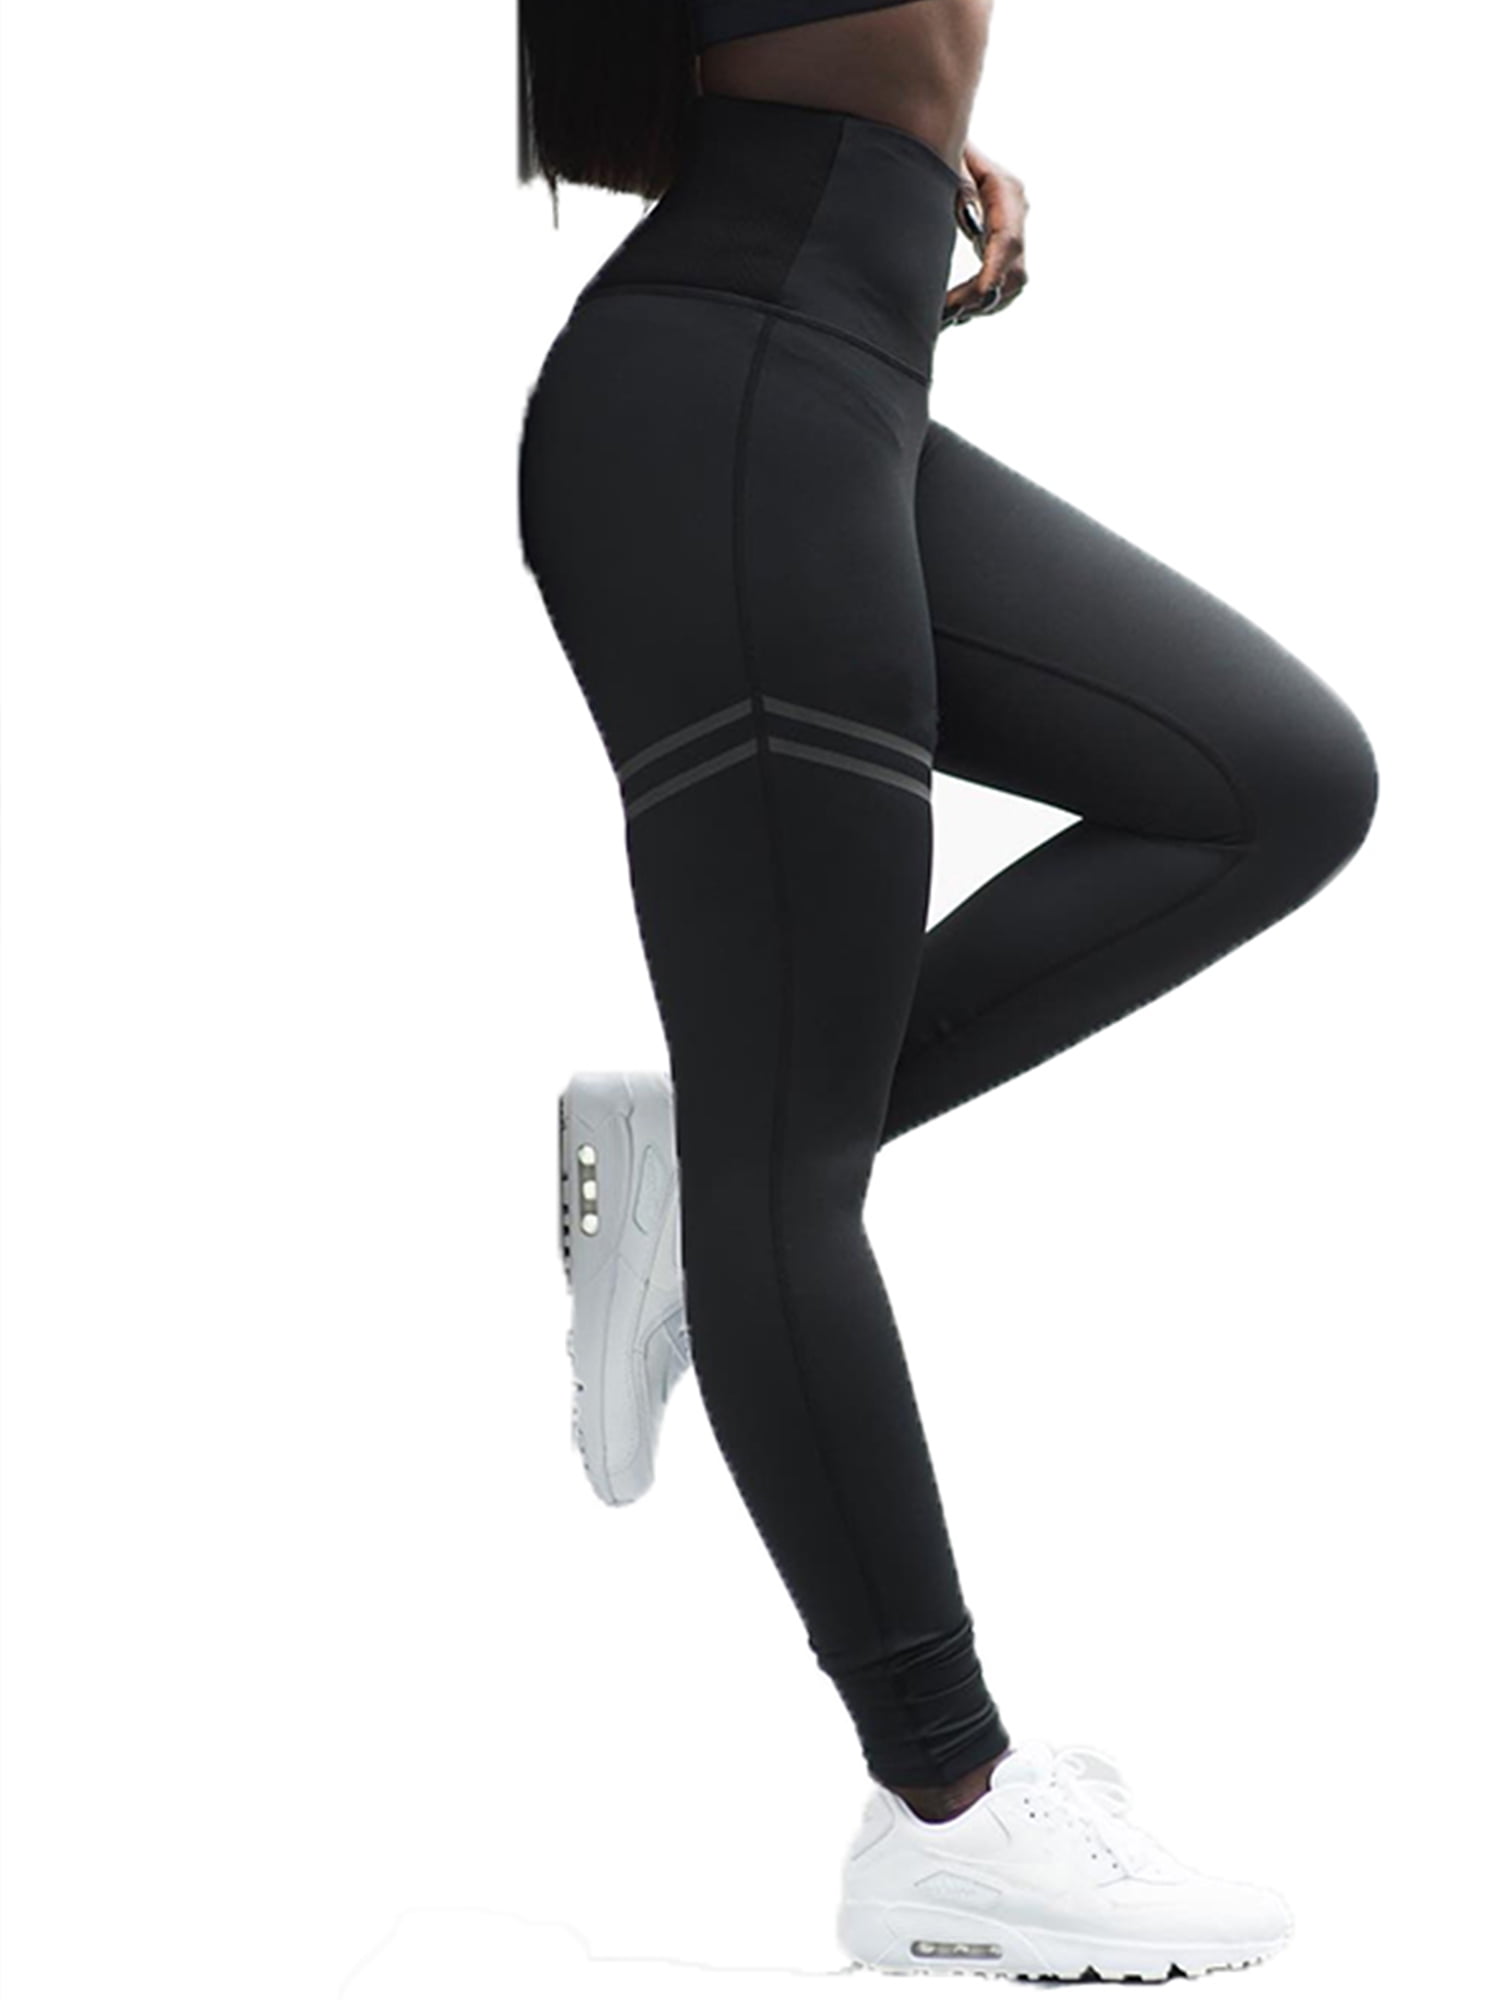 HOSOME Women Solid Sports Tight Pants Workout Leggings Fitness Sports Yoga Pants Yoga Pants